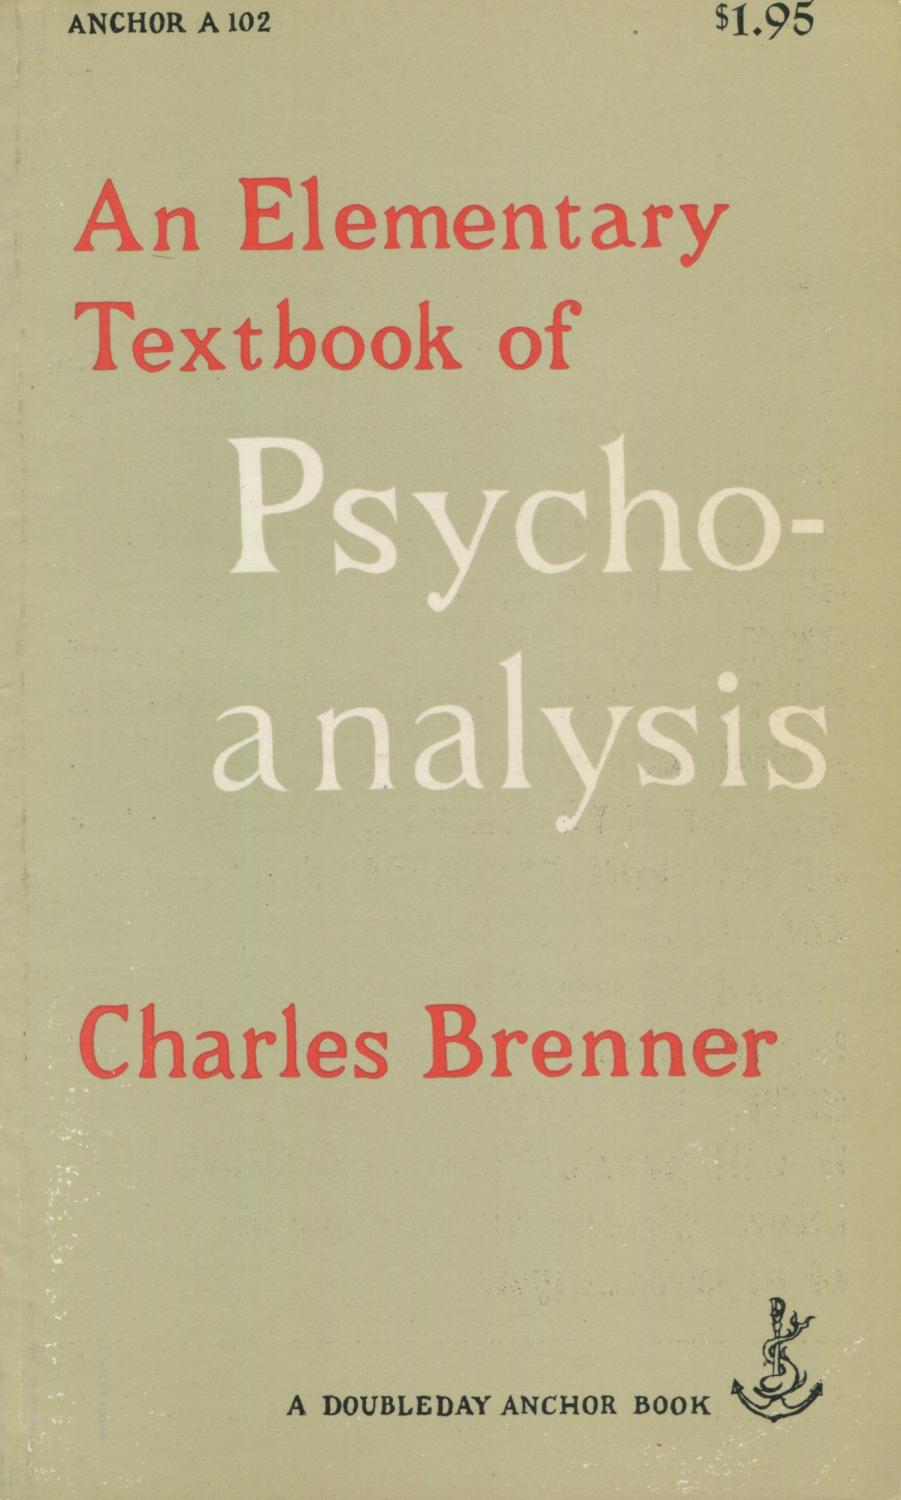 An Elementary Textbook Of Psychoanalysis - Brenner, Charles